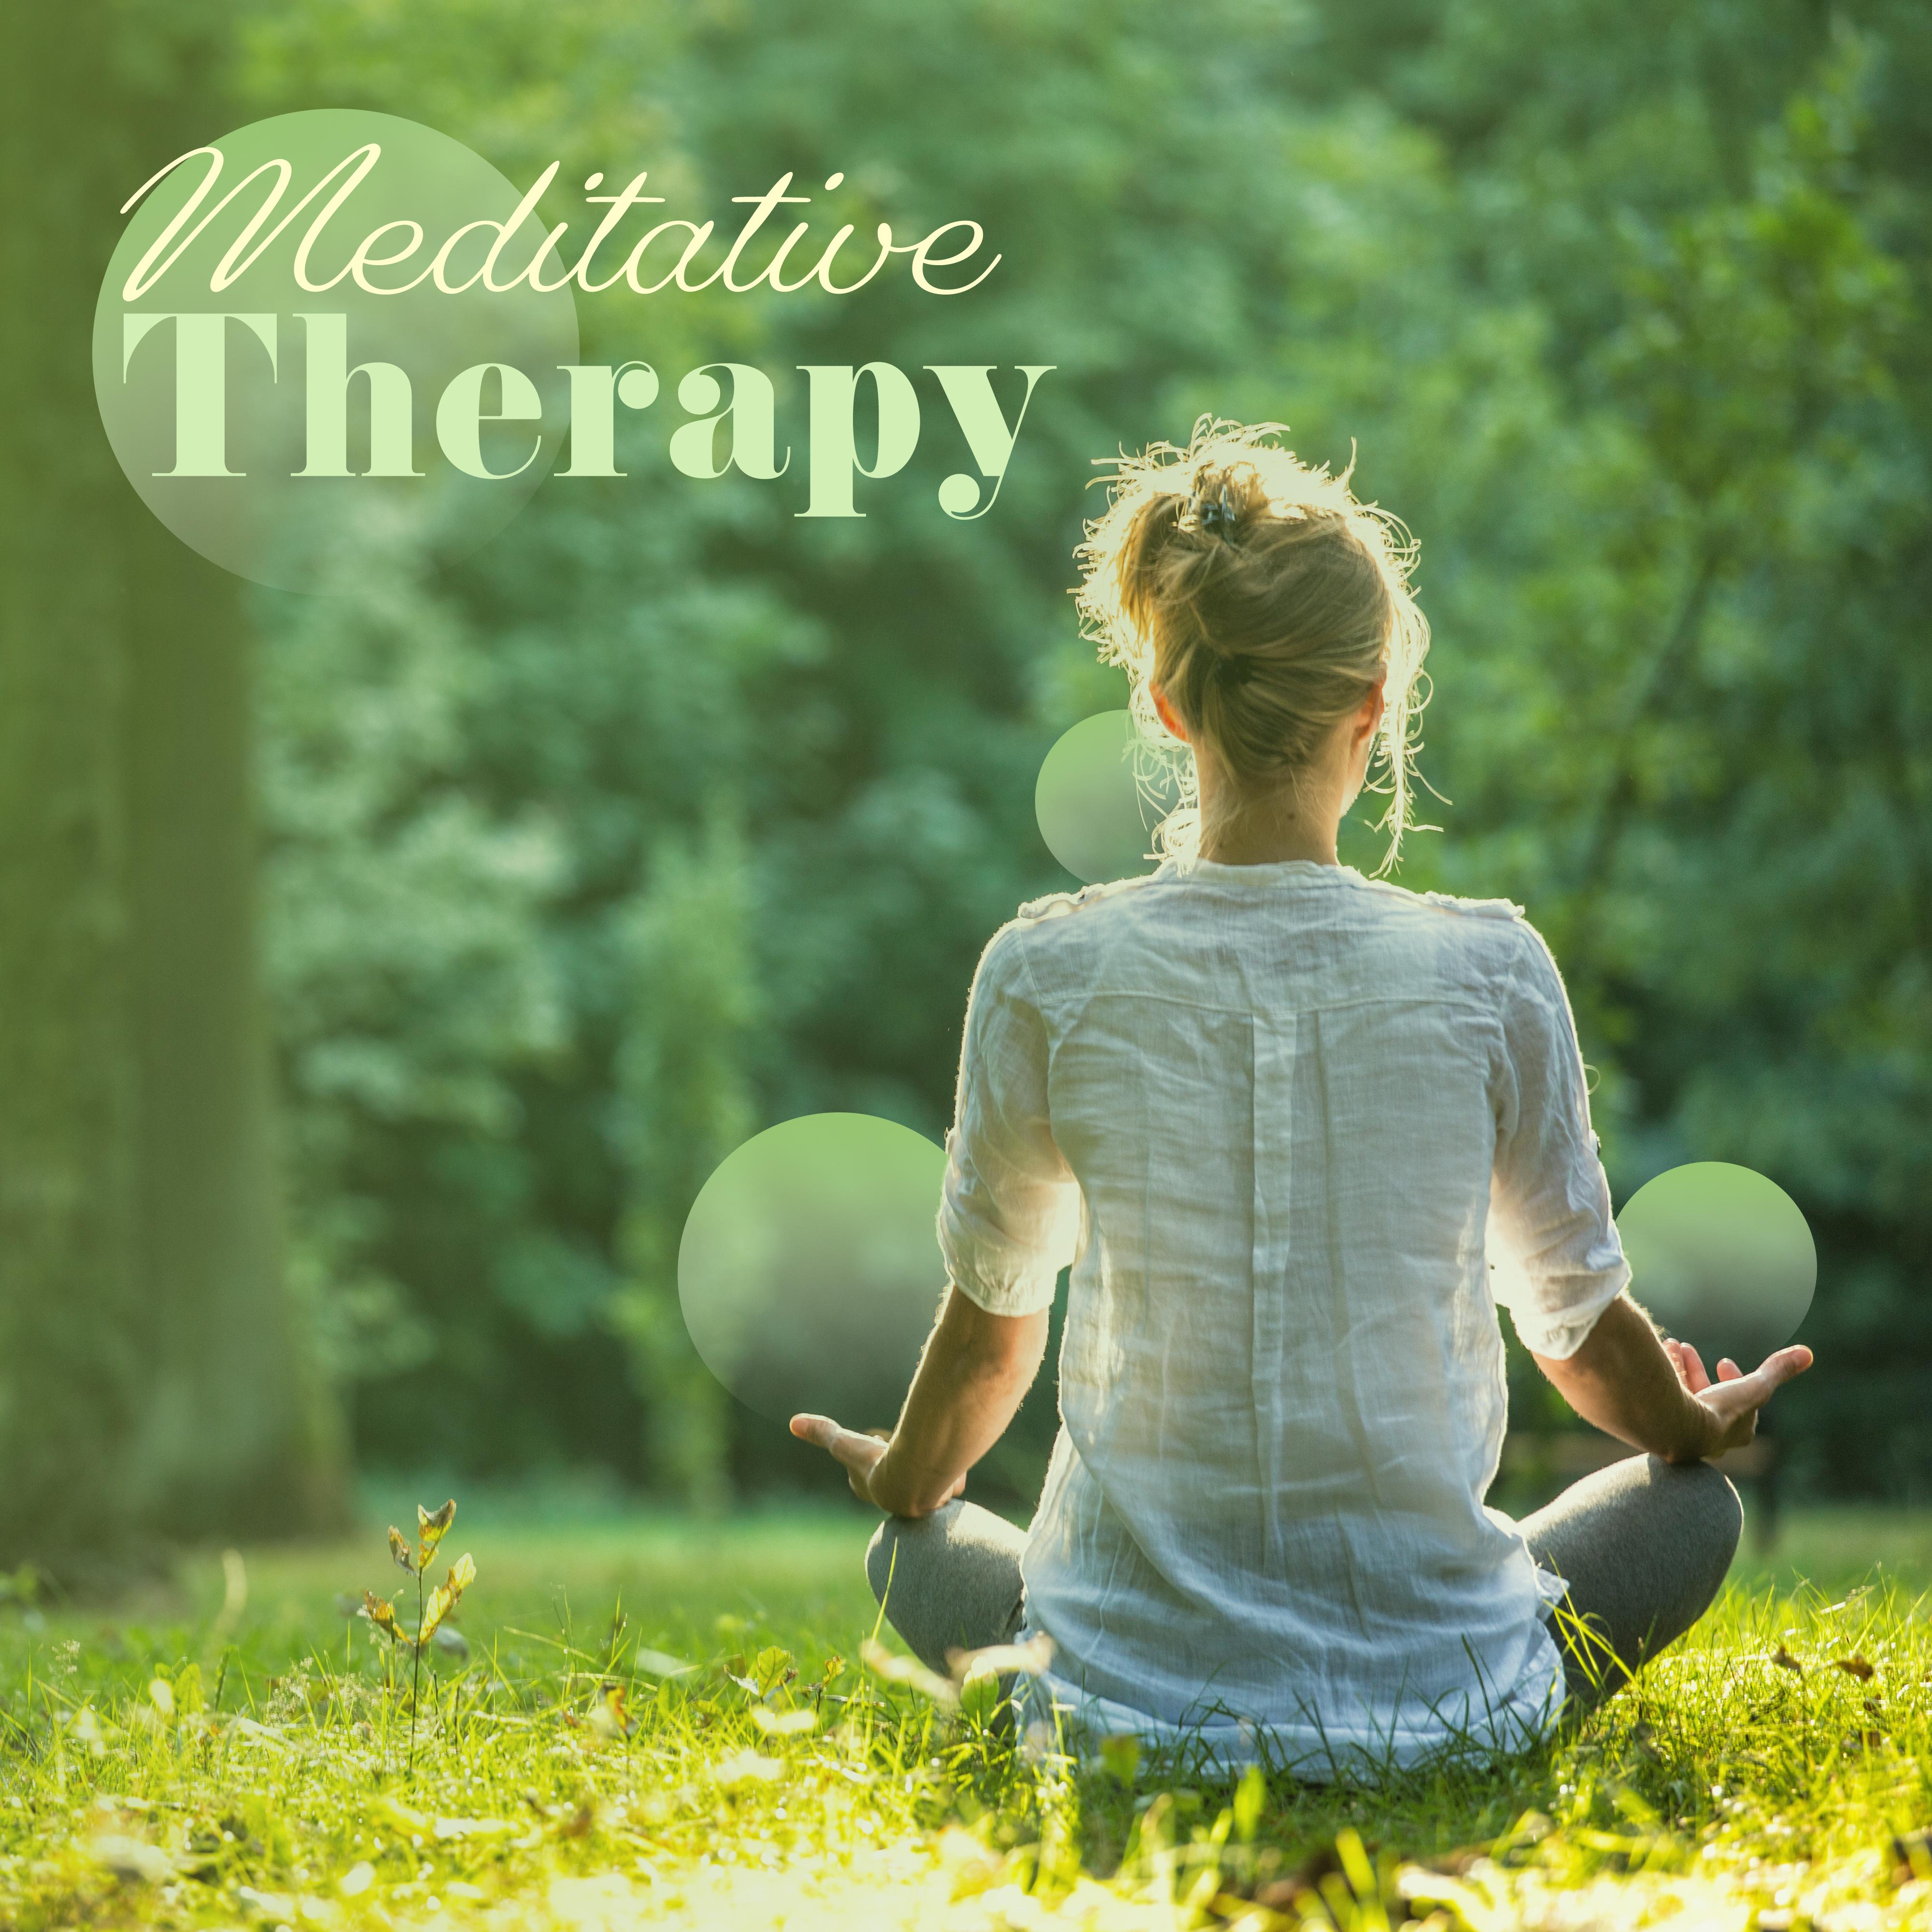 Meditative Therapy - 15 Songs for Meditation, Helping to Relieve Stress and Tension, Depression and Negative Emotions as well as other Disorders of Internal Harmony and Balance